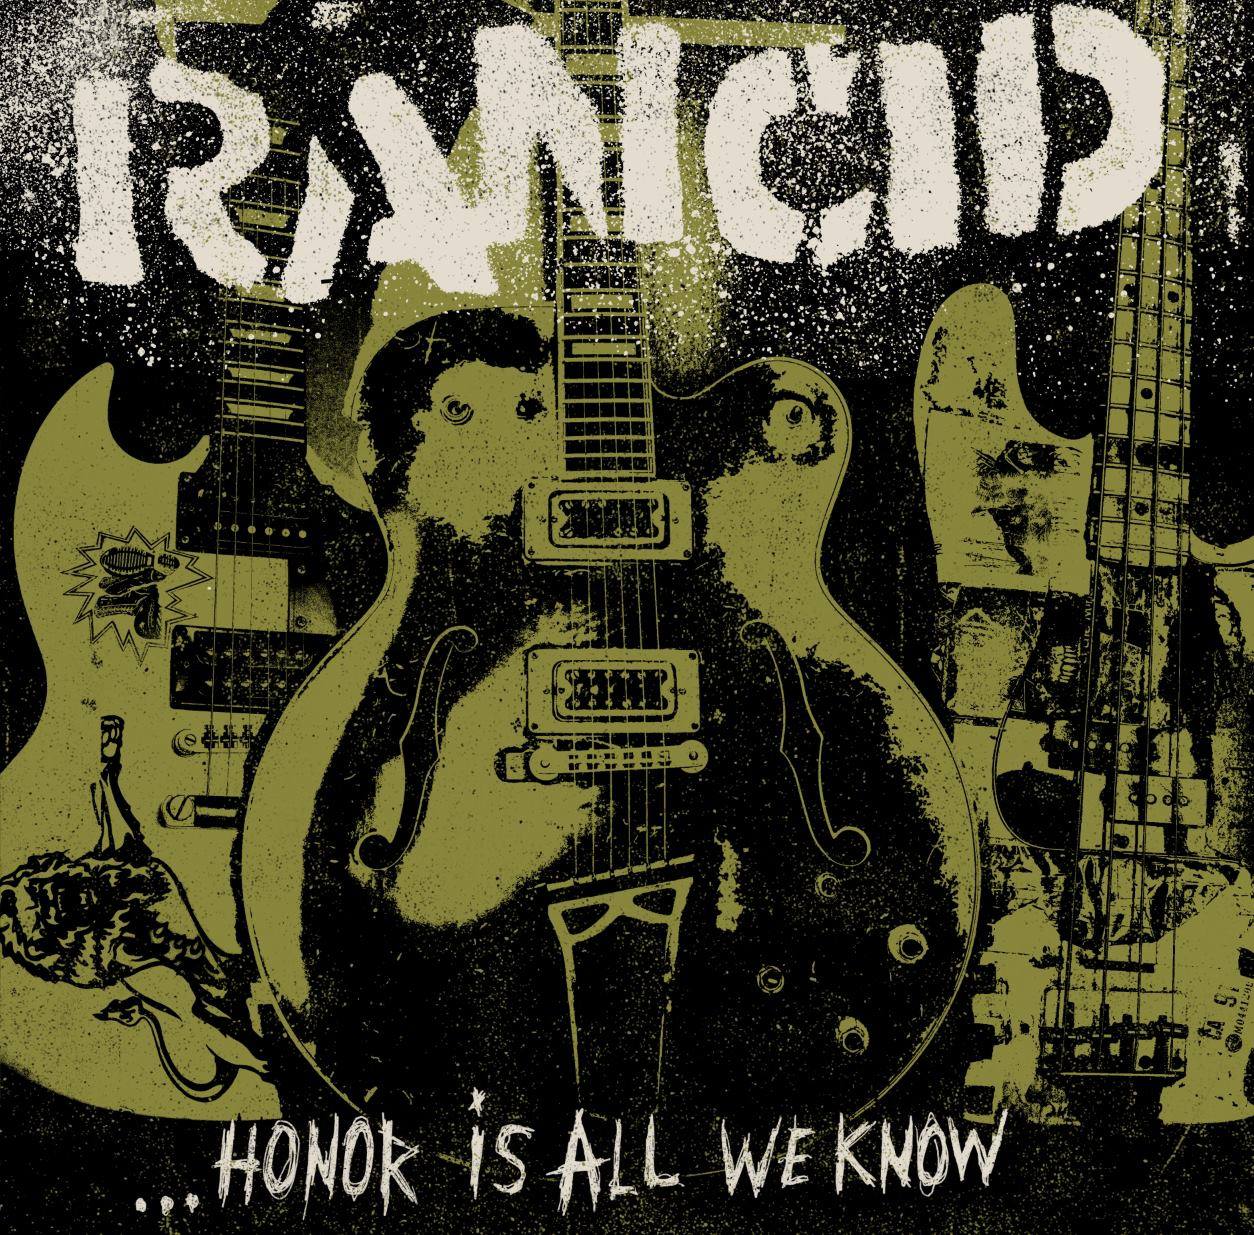 RANCID RELEASE NEW 3-SONG VIDEO FROM UPCOMING ALBUM ‘HONOR IS ALL WE KNOW’